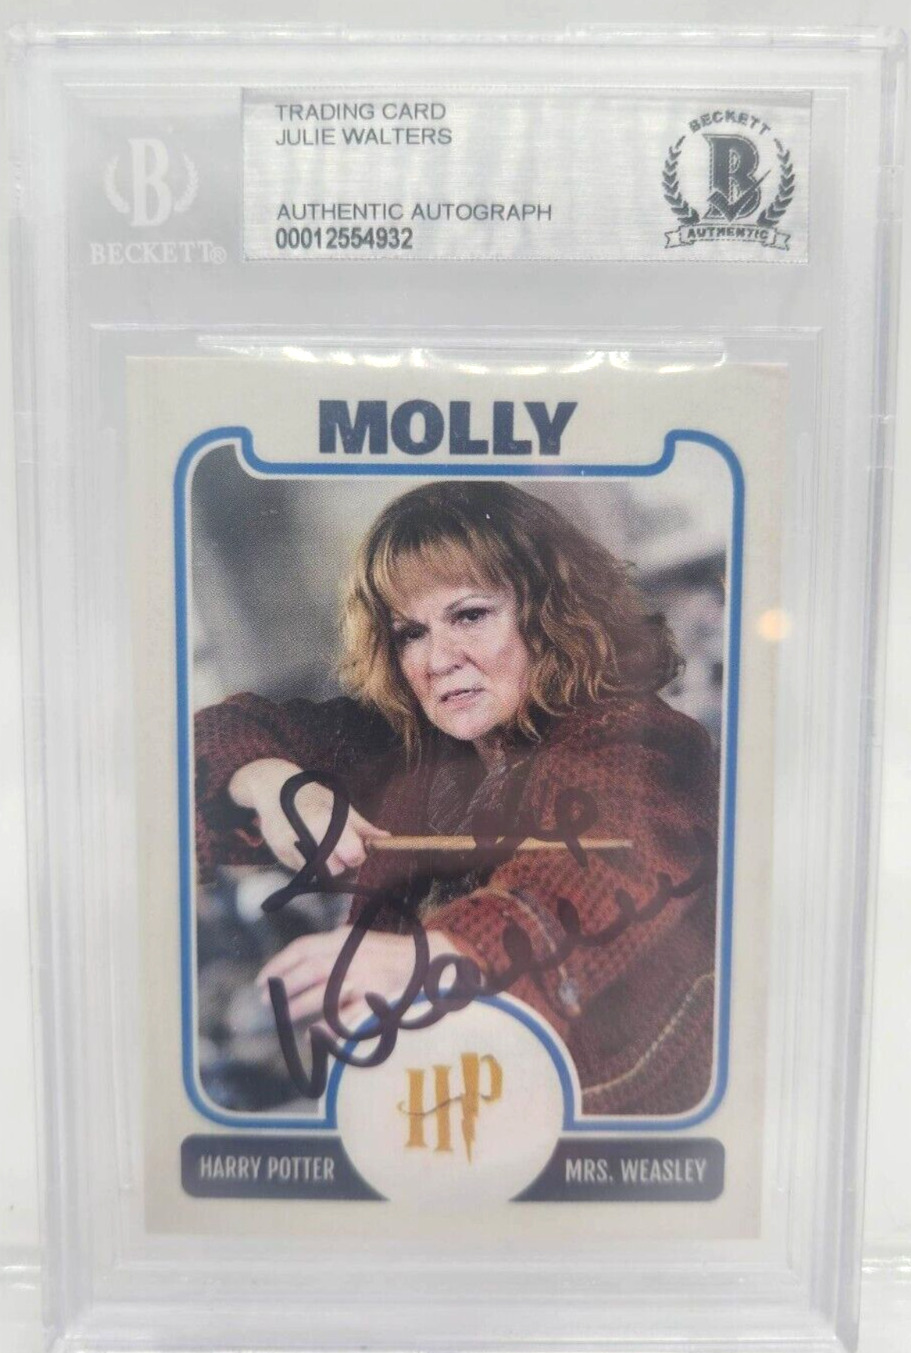 Julie Walters Harry Potter Molly (Mrs.) Weasley Beckett Authentic Auto Card